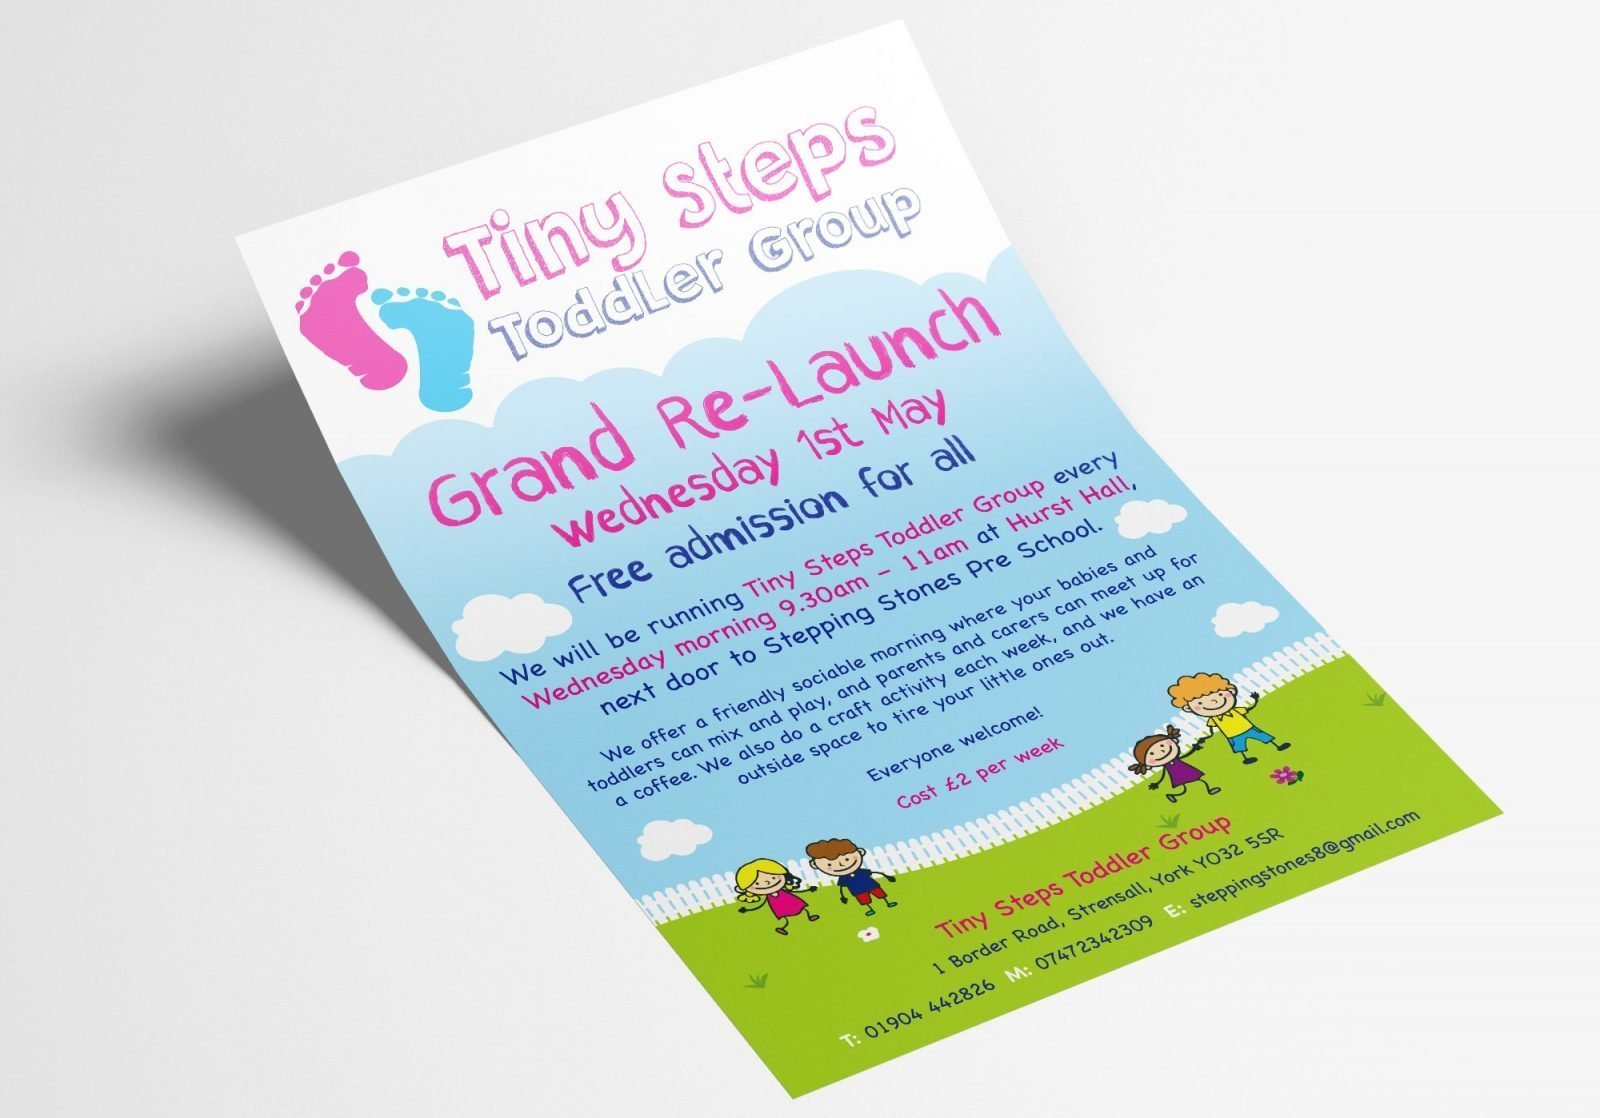 A5 Leaflet for Tiny Steps toddler group grand launch